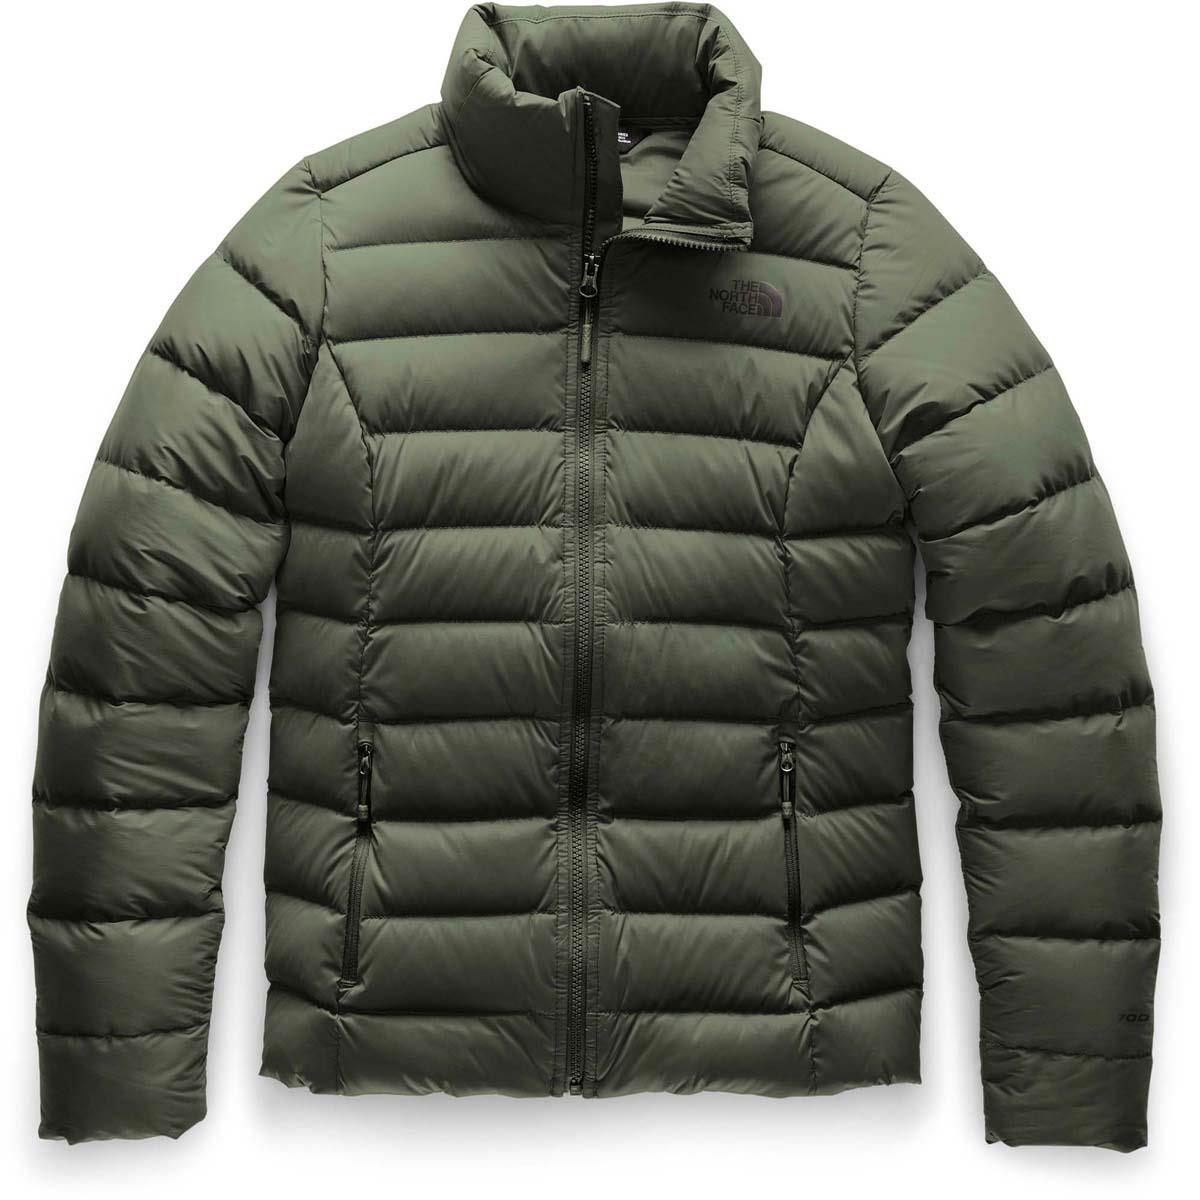 north face down jacket women's